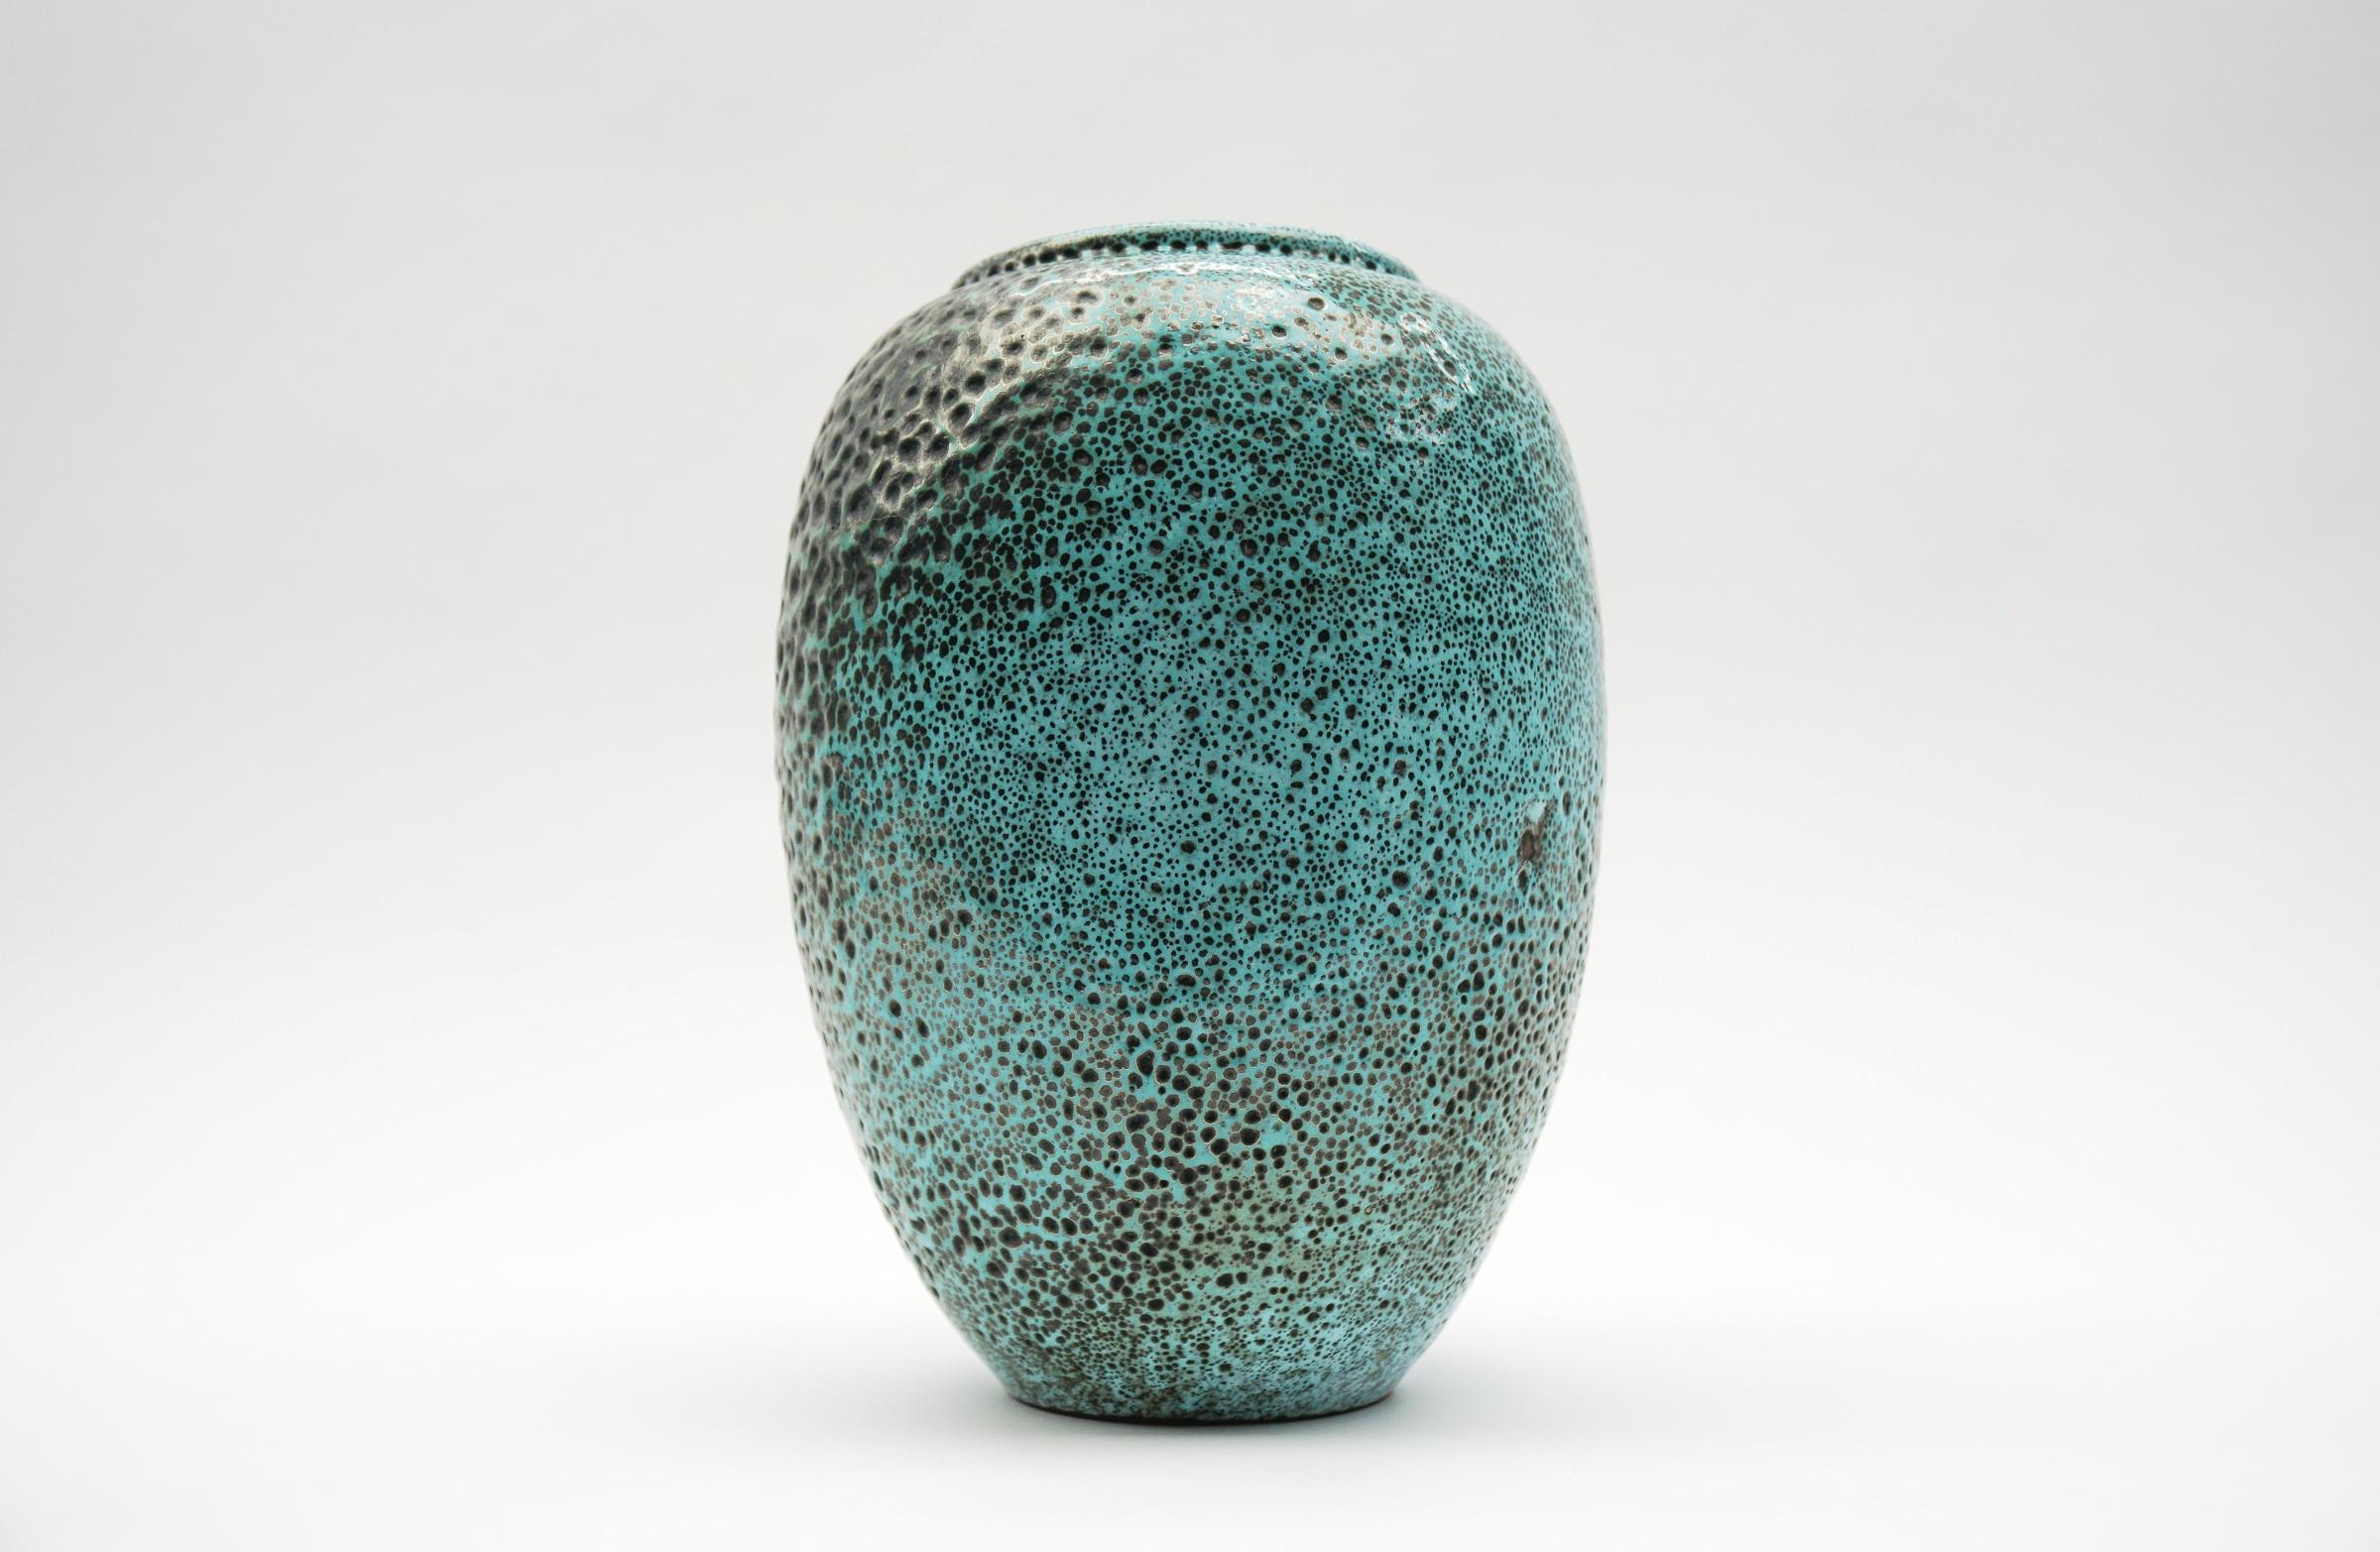 Lovely Green Lava Studio Ceramic Vase by Wilhelm & Elly Kuch, 1960s, Germany

Very good condition.

---------------------------------------

Wilhelm Kuch, born 1925, 1947 apprenticeship - Gusso Reuss in Munich - 1948 opened the studio in Burgthann -